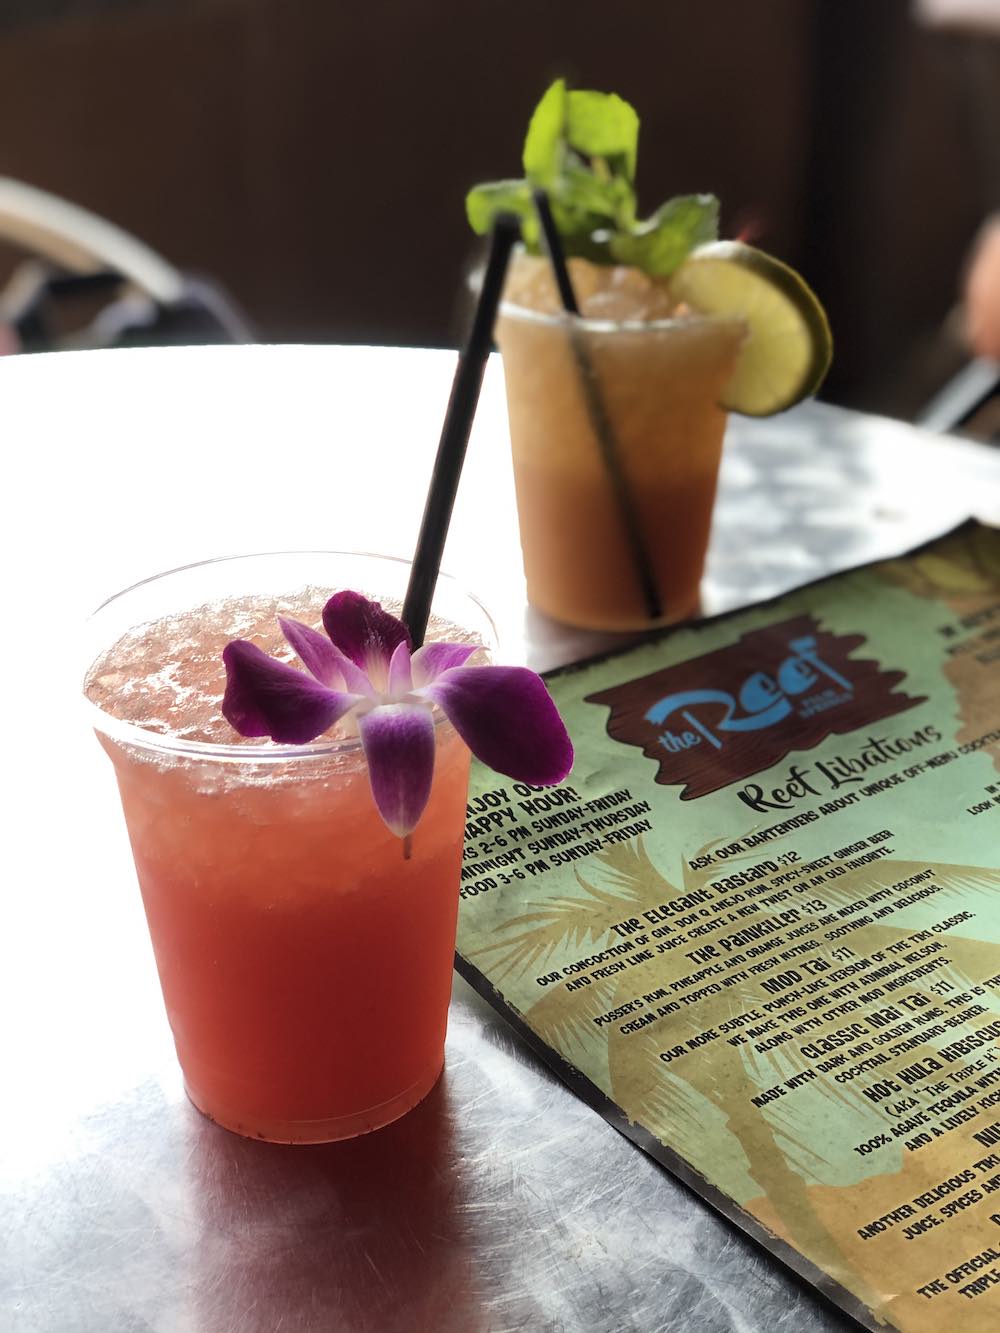 How To Spend 3 Days in Palm Springs - The Reef Tiki Bar